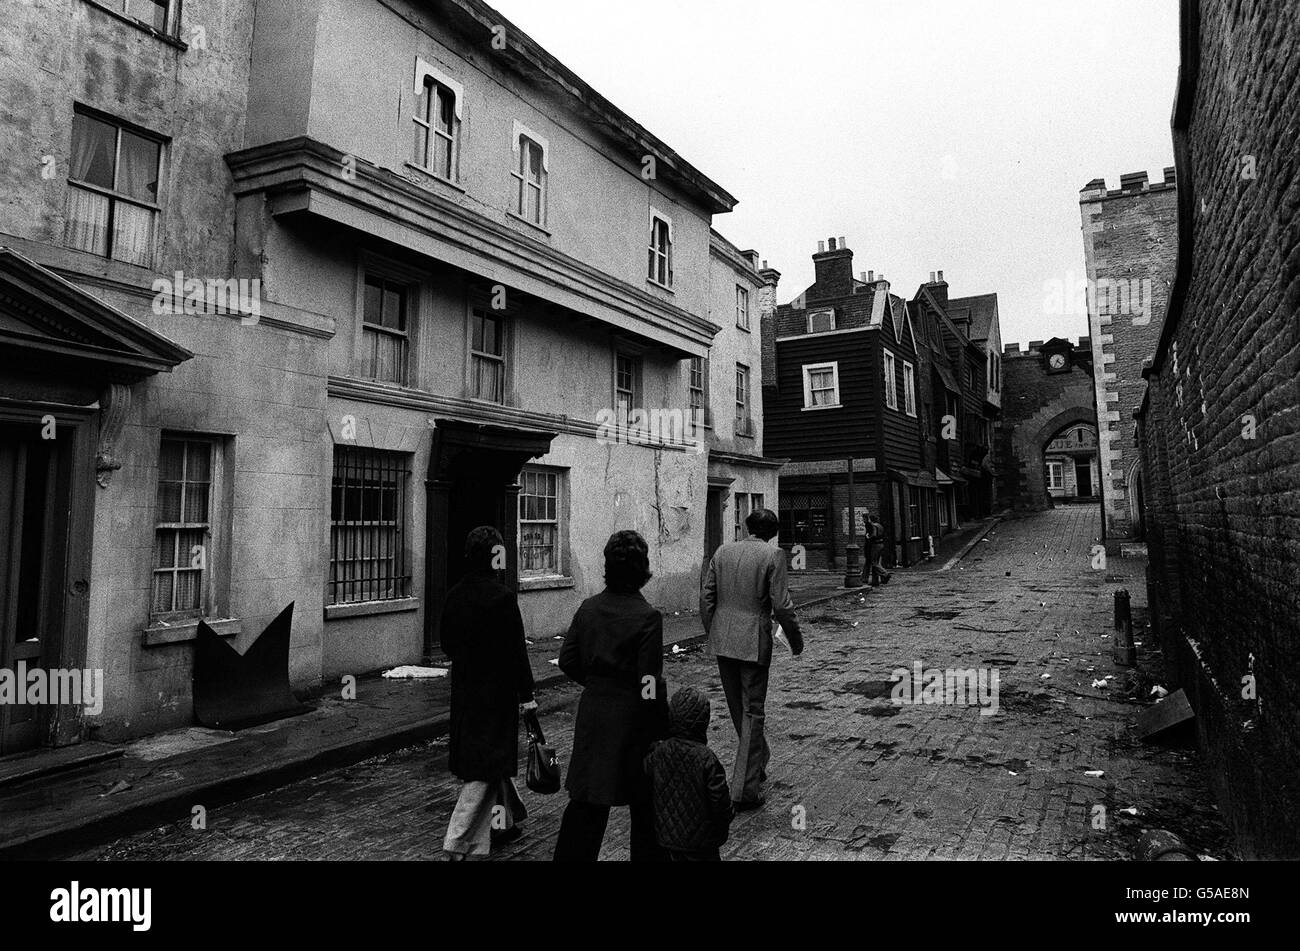 Visitors to Shepperton film studios, stroll along a mock-up of a street used in the musical film Oliver. *11/02/01 The film studio behind hits such as Blade Runner, Top Gun, Alien and Shakespeare in Love, has been sold to arch rival Pinewood Studios for 35 million, it emerged. The deal brings together two of the largest film and television studios in Europe and is set to create a global rival to Hollywood. It is being part-financed by venture capitalist 3i and led by Michael Grade, who heads the management team at Pinewood. Stock Photo